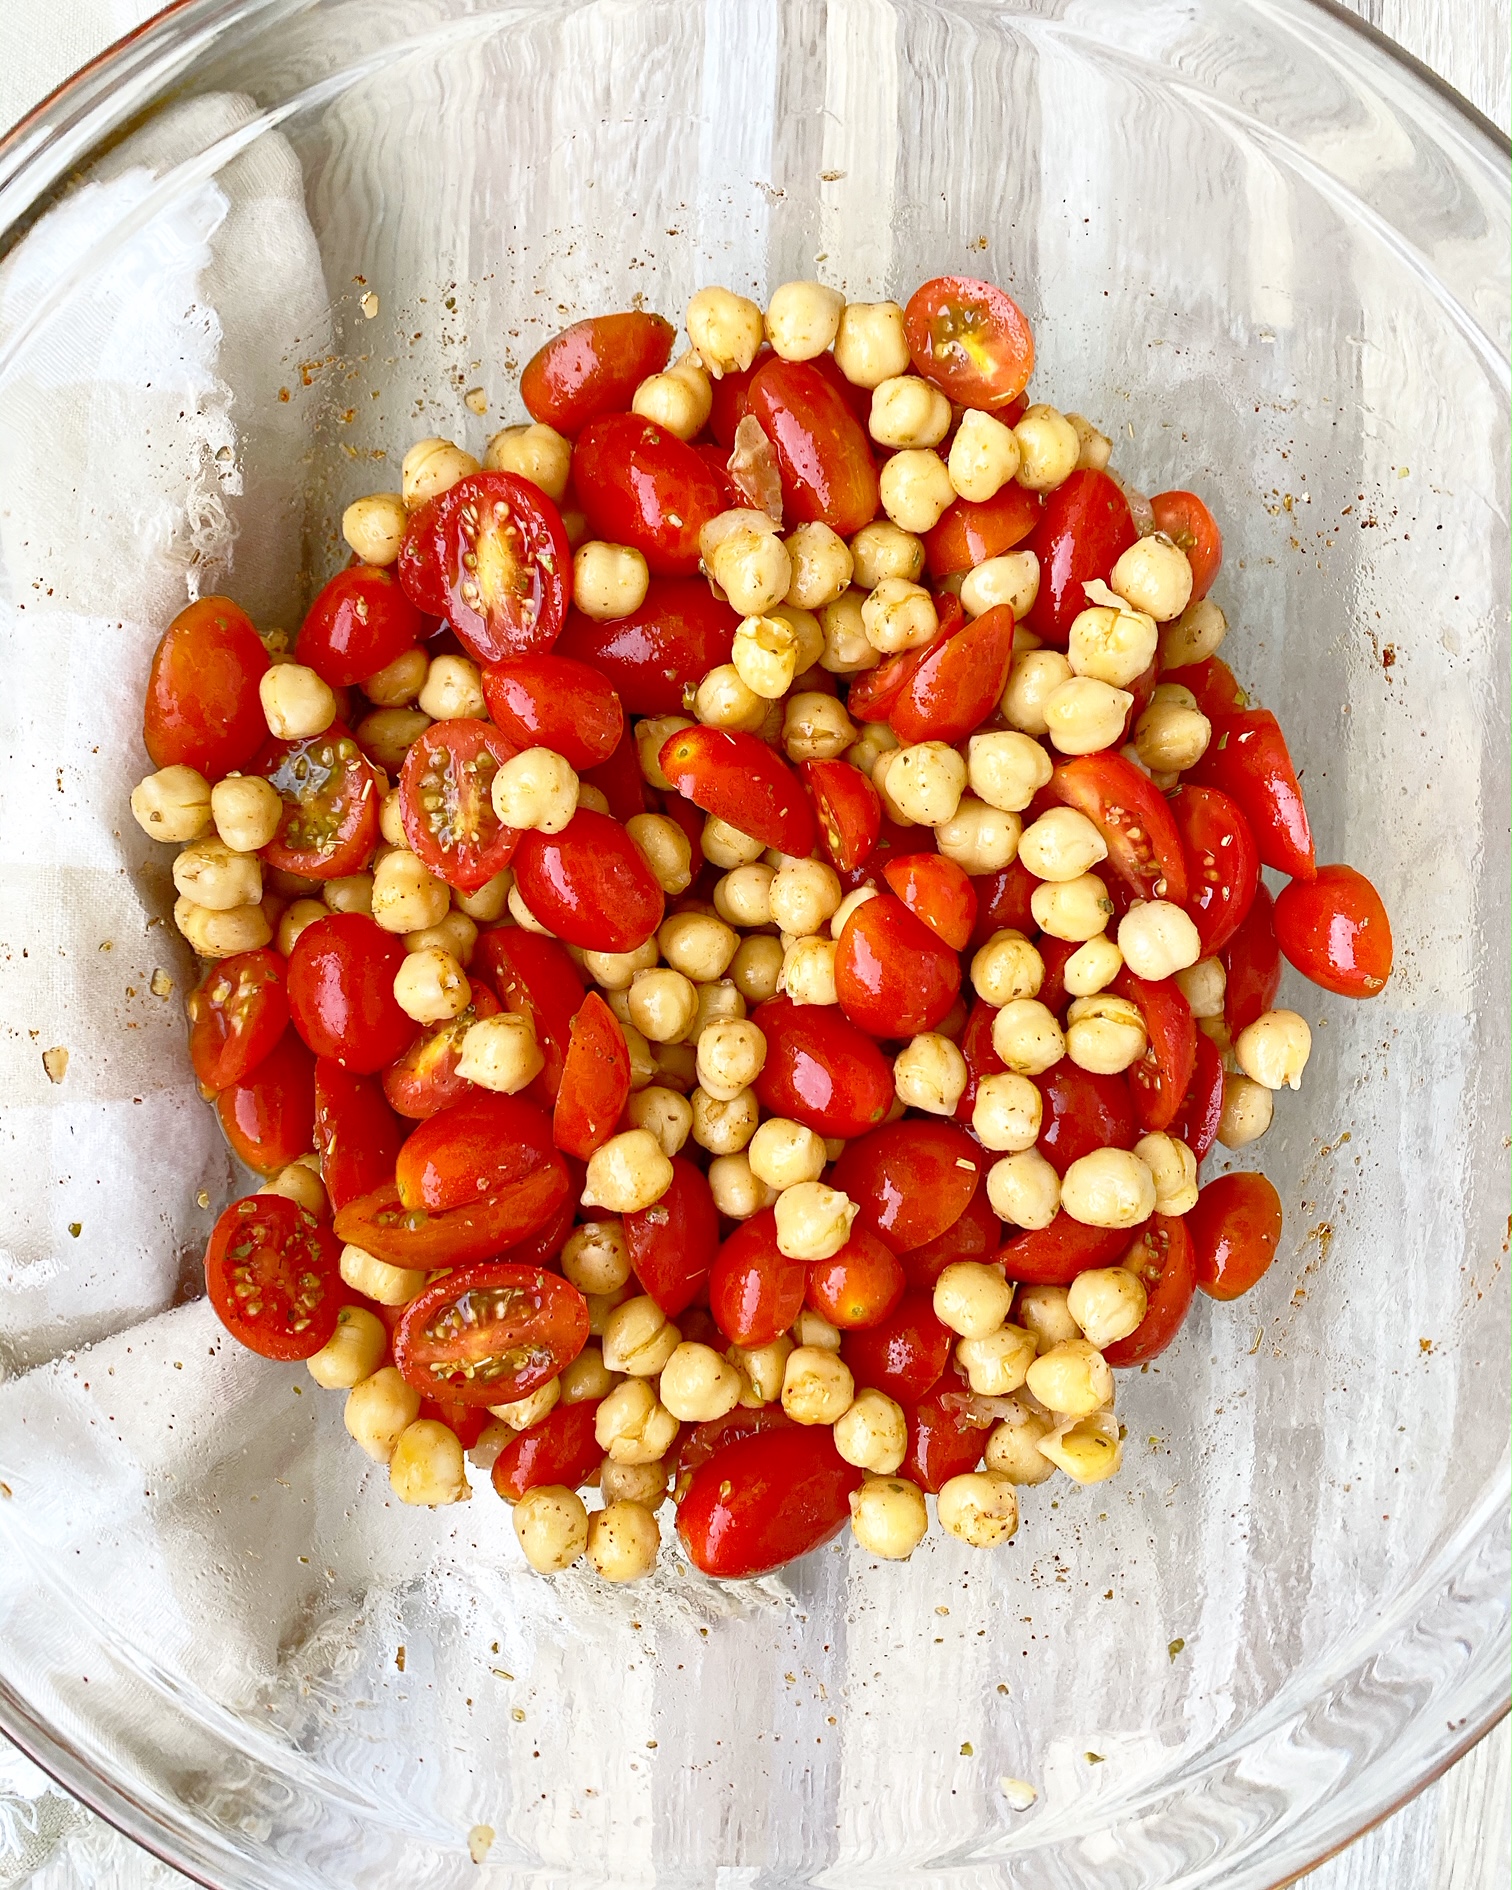 tomatoes, chickpeas, seasonings, lemon juice, and broth in a large clear bowl